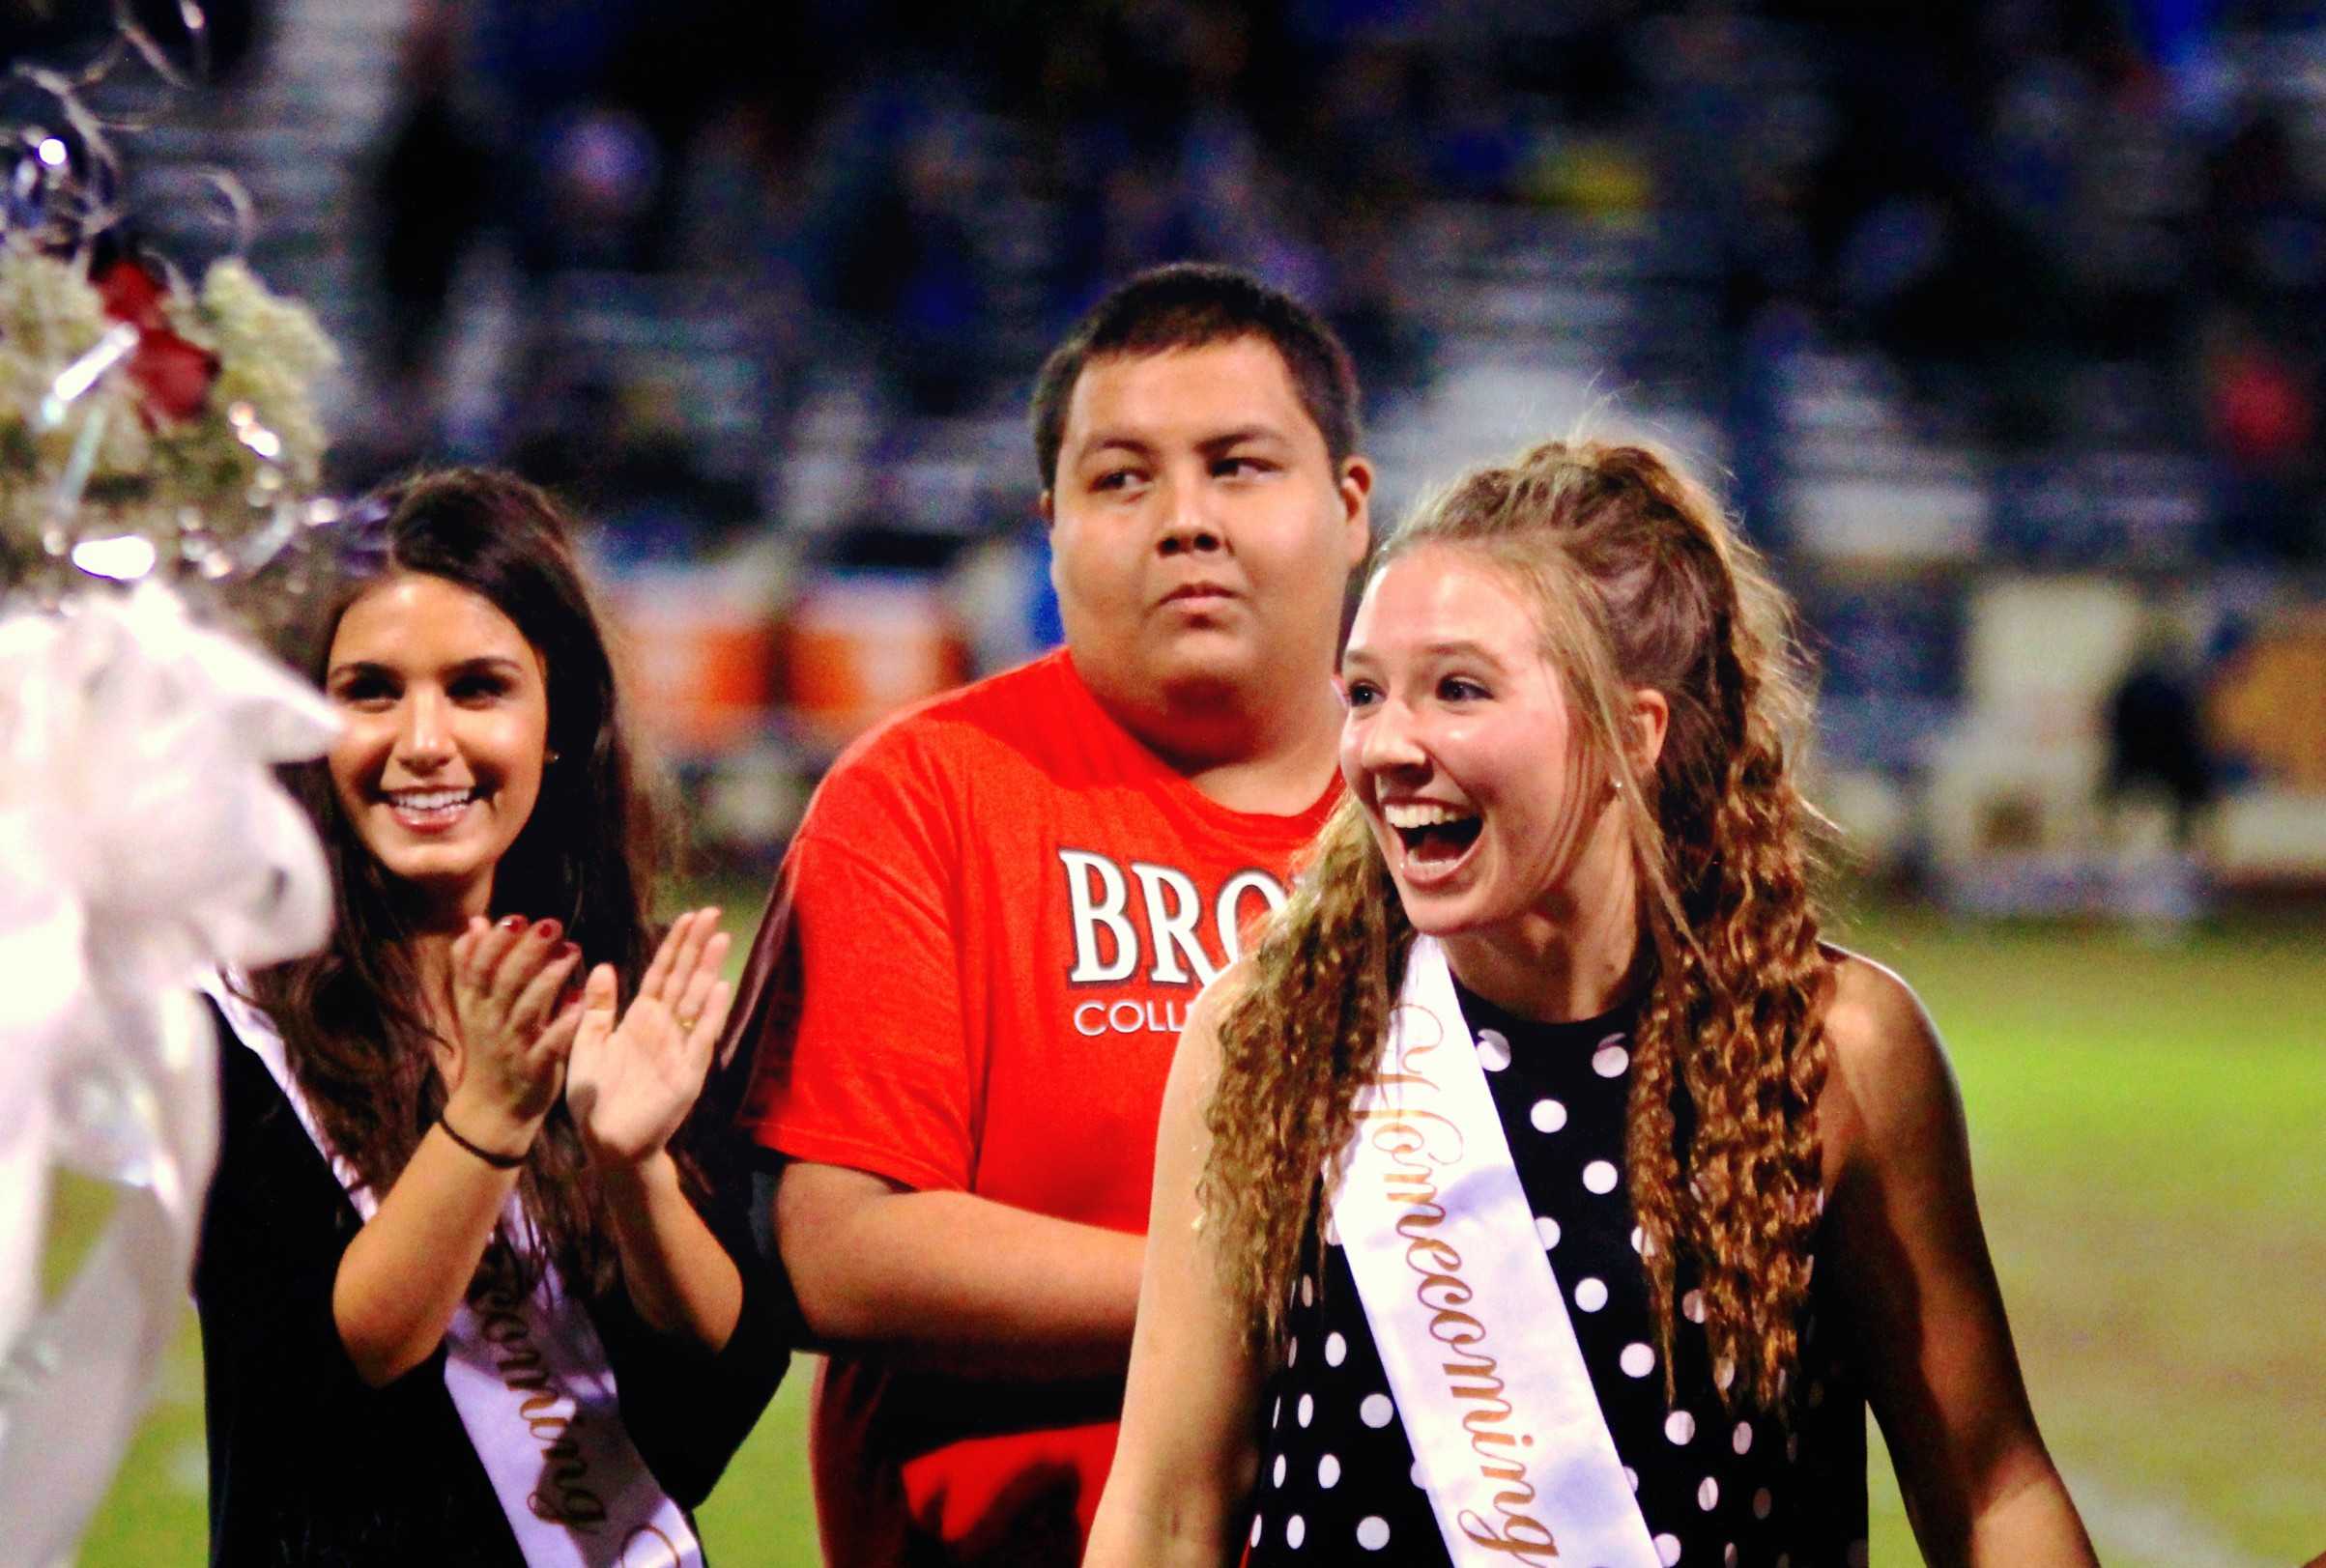 The decrees: Homecoming King and Queen speak – XPress